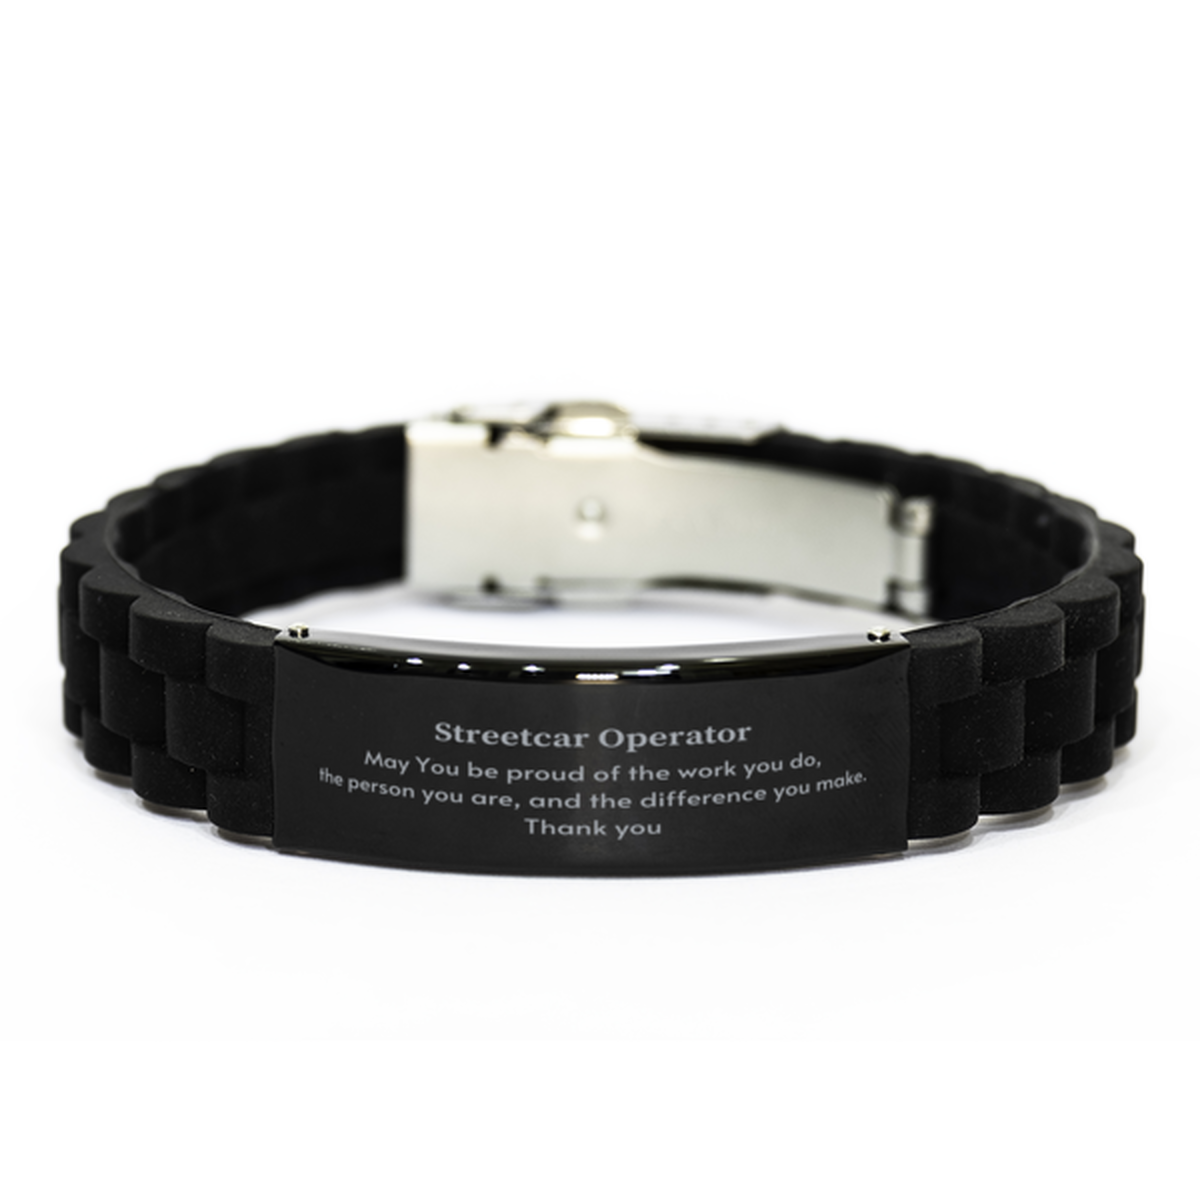 Heartwarming Black Glidelock Clasp Bracelet Retirement Coworkers Gifts for Streetcar Operator, Streetcar Operator May You be proud of the work you do, the person you are Gifts for Boss Men Women Friends